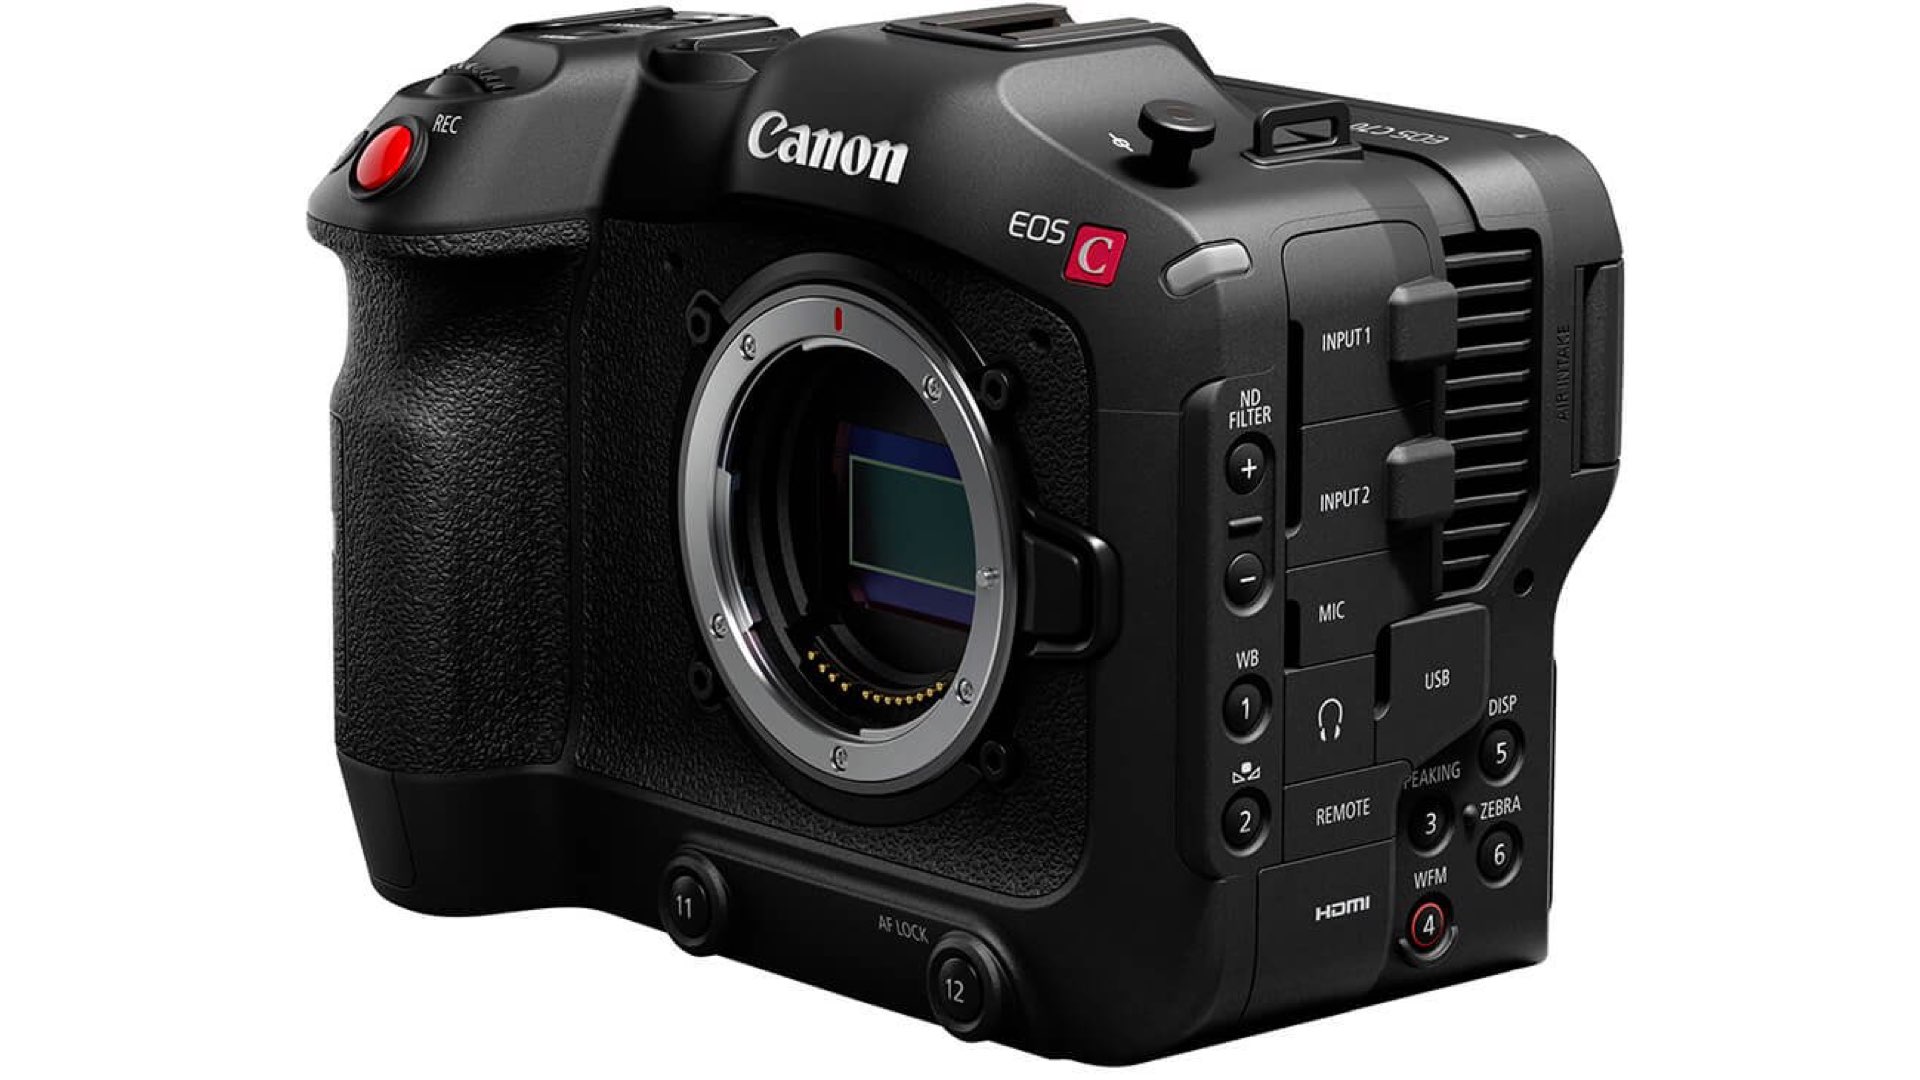 EOS C70: Hybridization between R5 and C300 Mark III